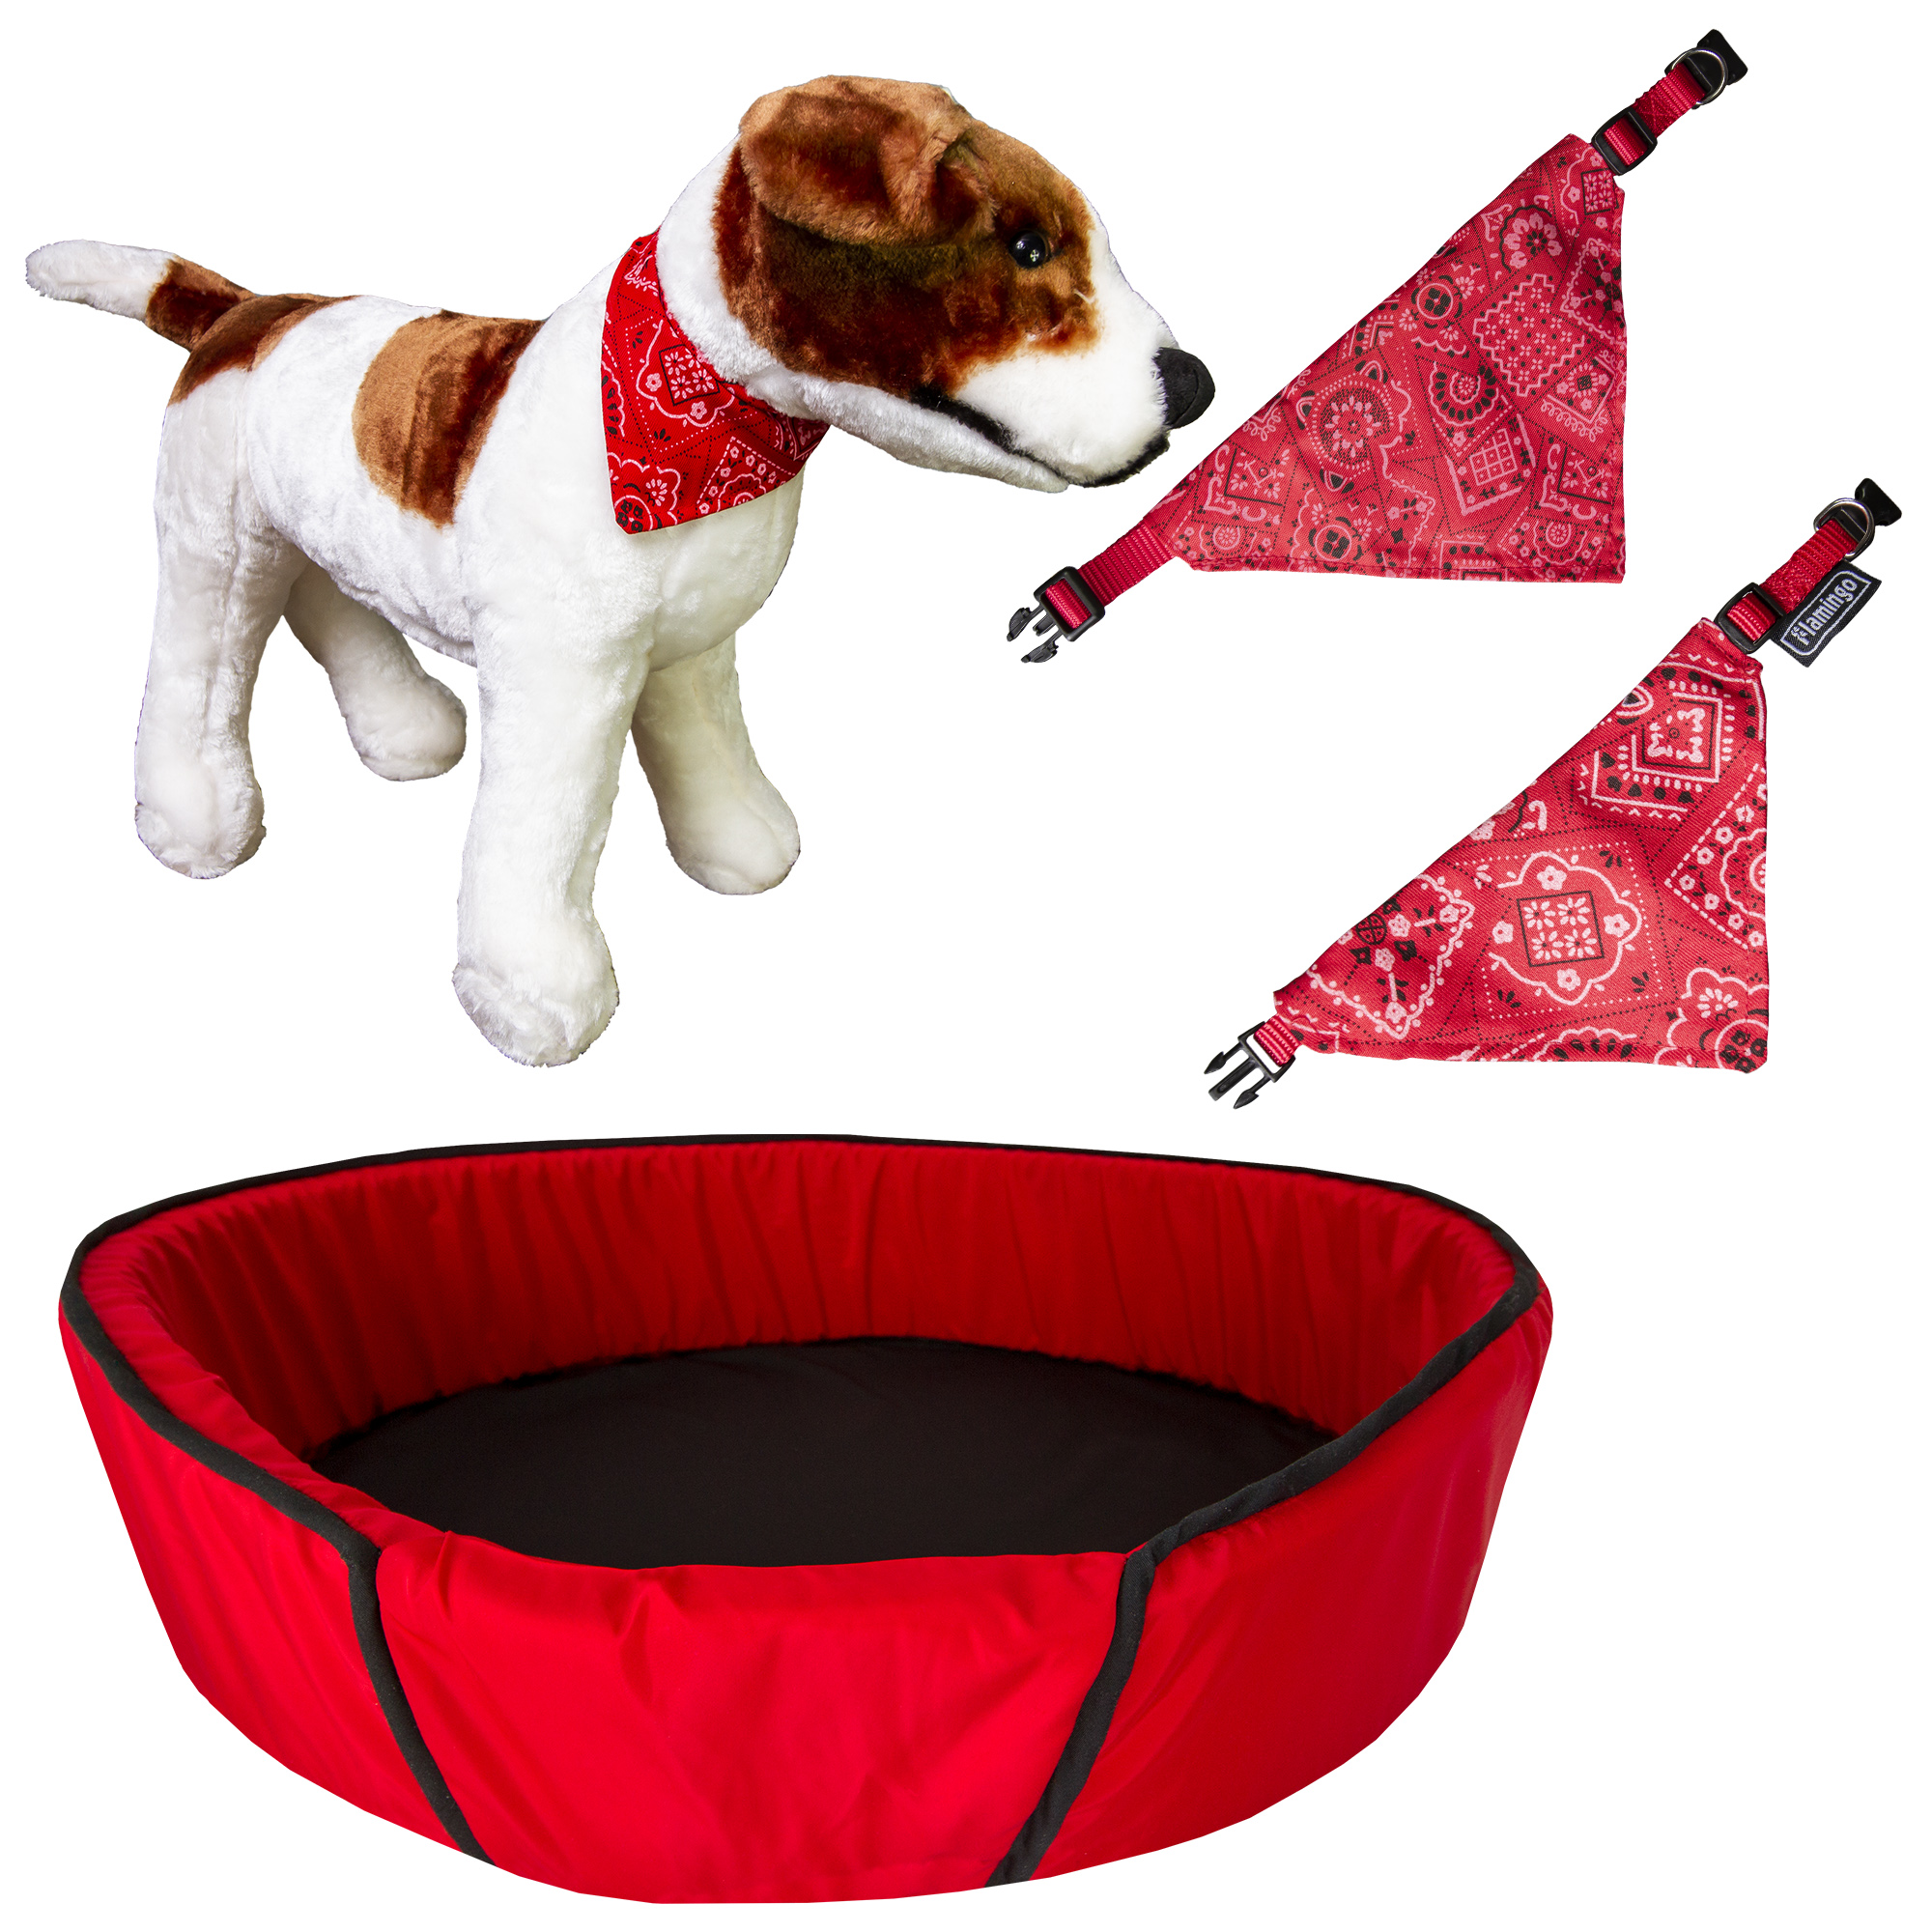 Veterinary/PETS CLOTHING & ACCESSORIES/Pets Accessories